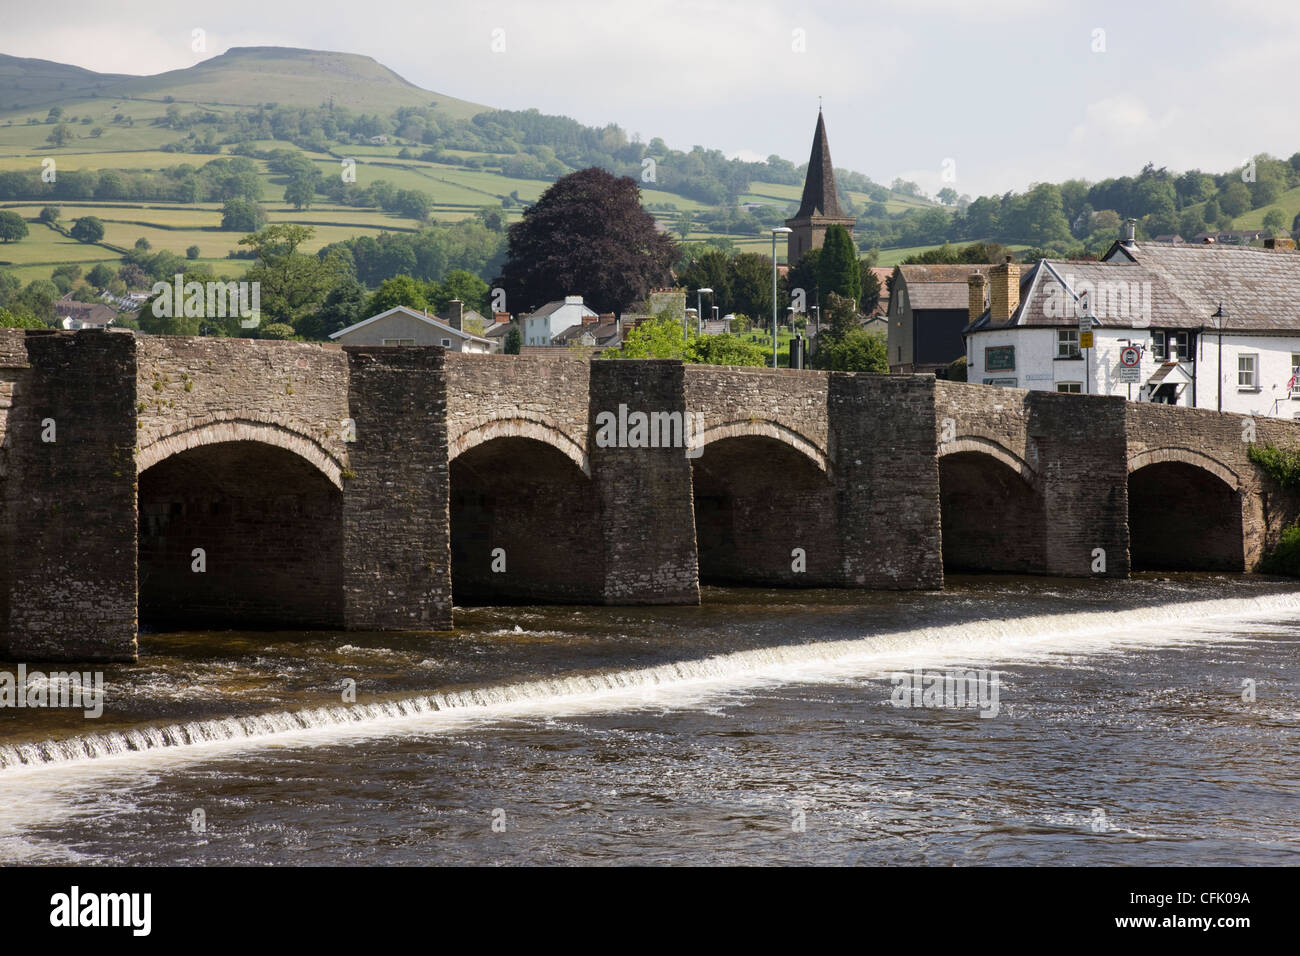 View of Crickhowell with the arched packhorse bridge over the River Usk in Powys, Wales Stock Photo